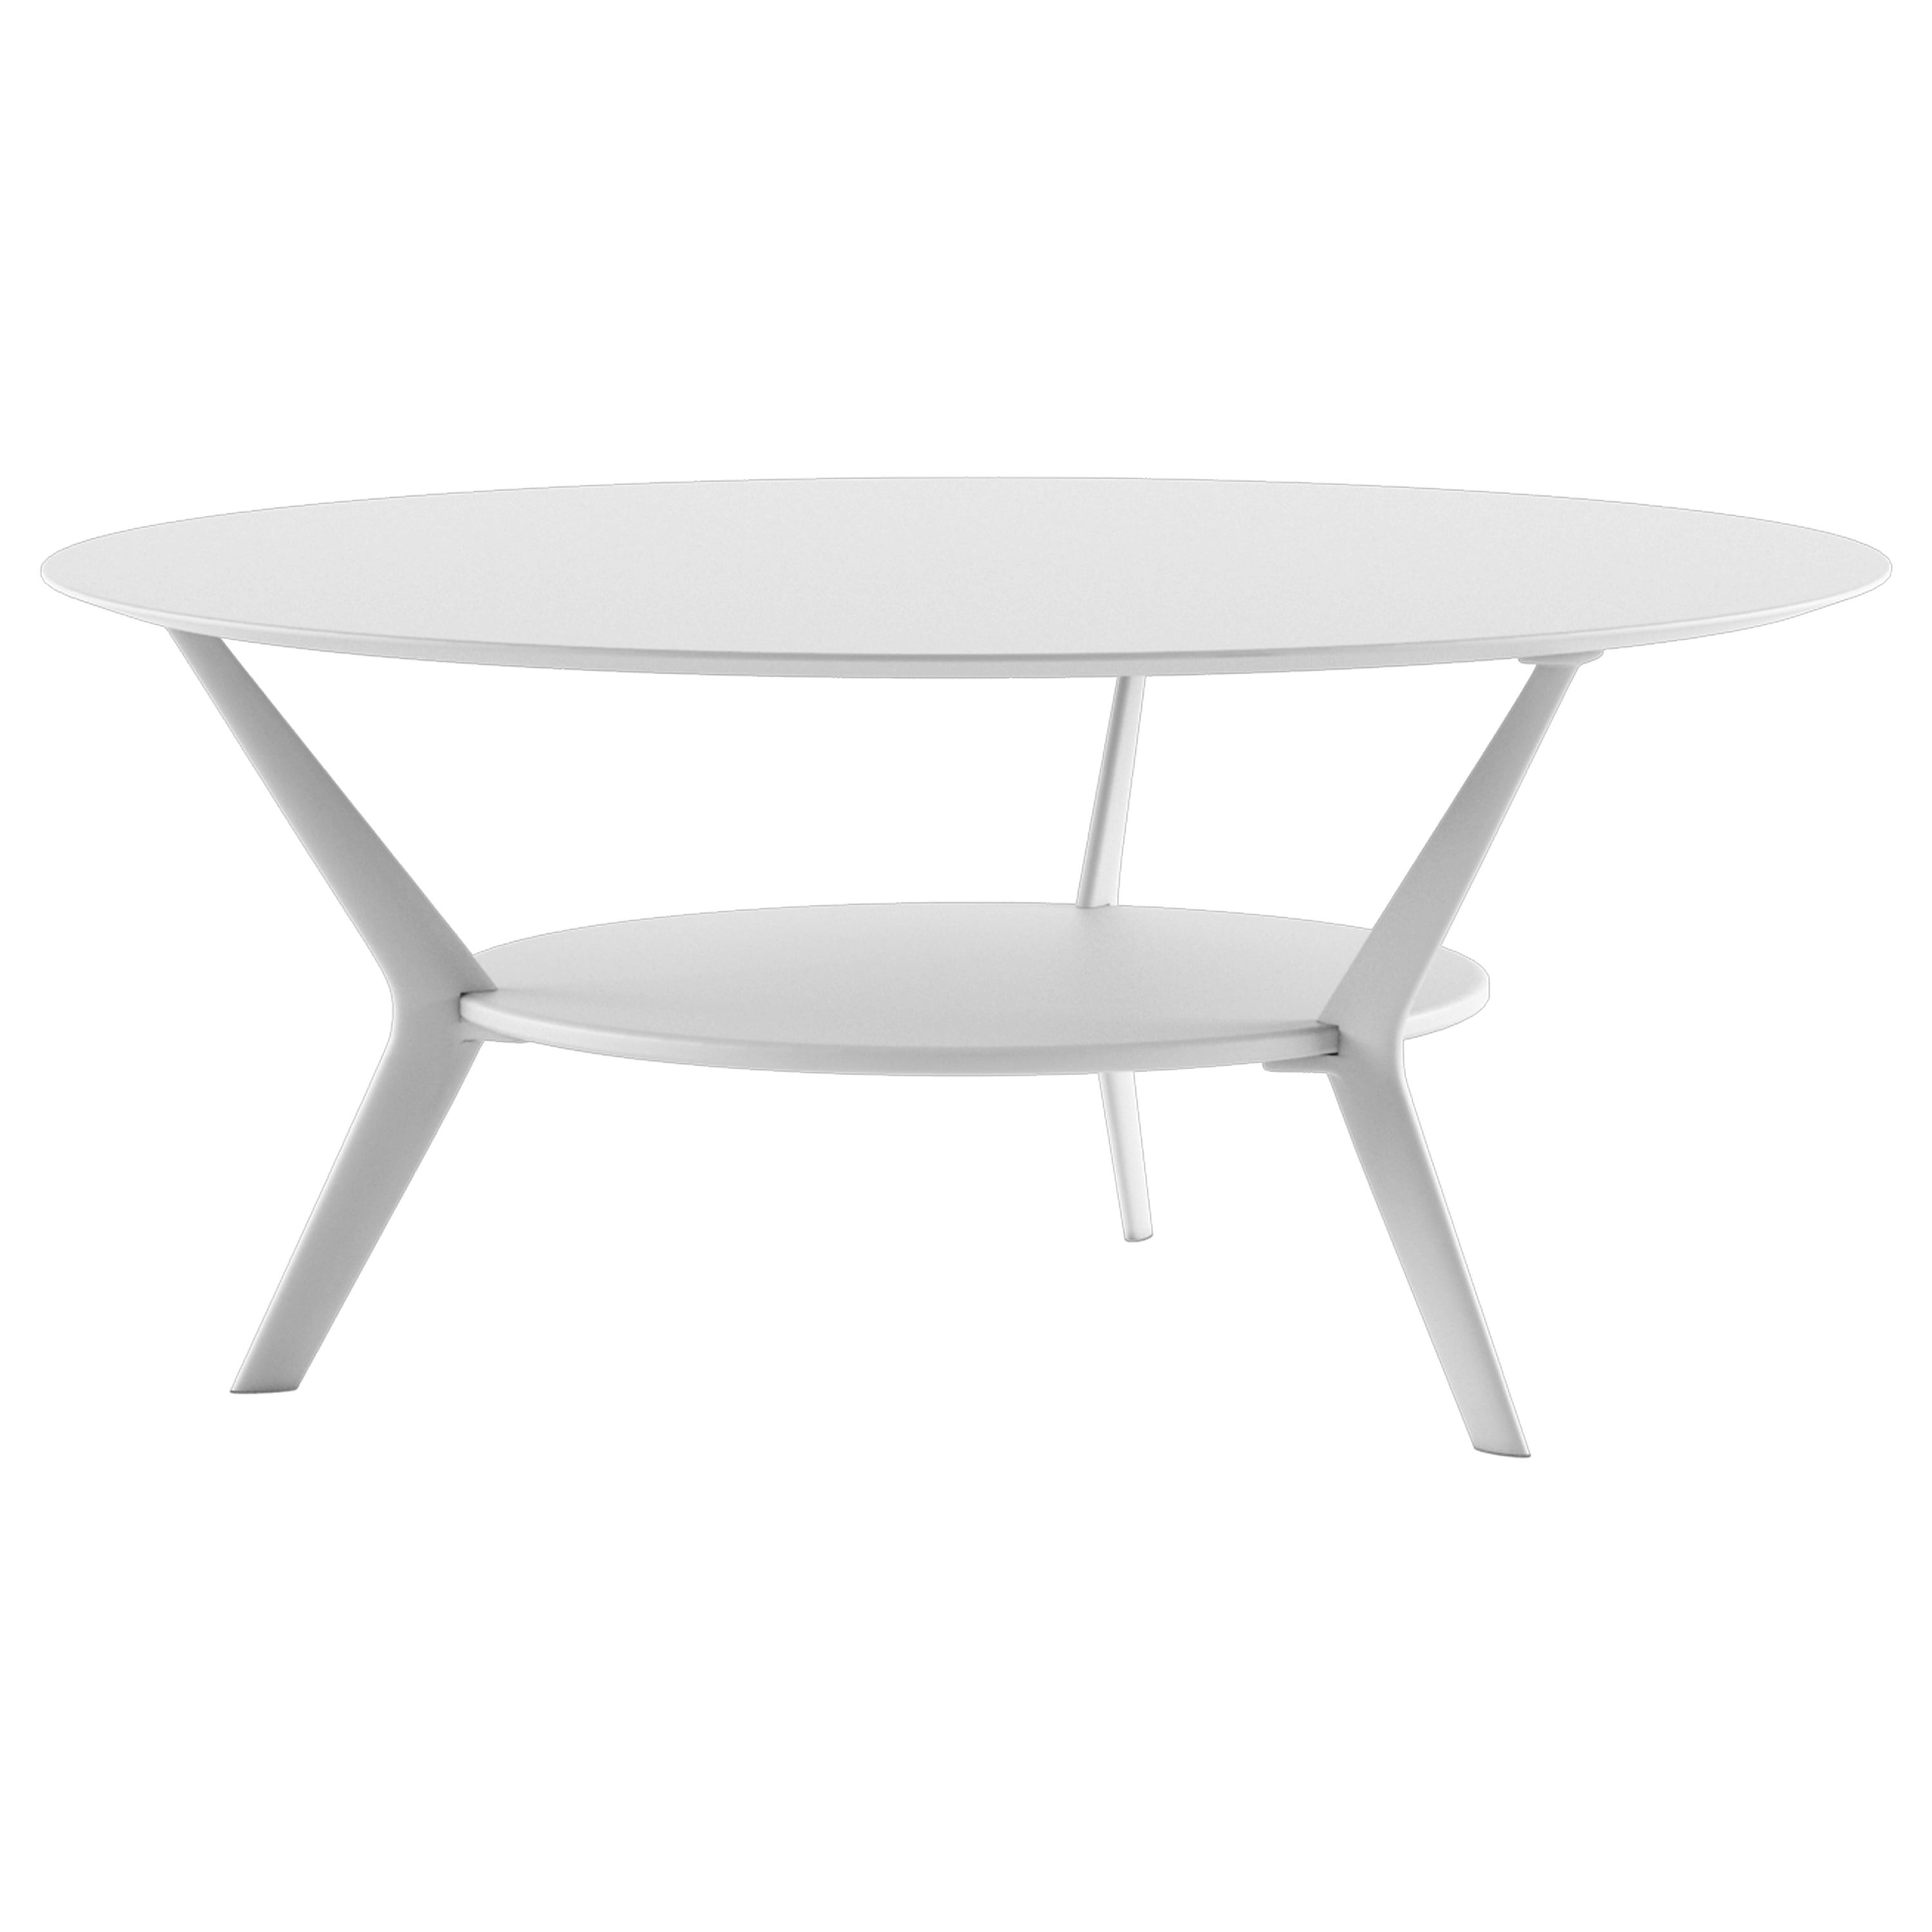 Alias B03 Biplane XS Ø80 Outdoor Table in White Top and Lacquered Frame